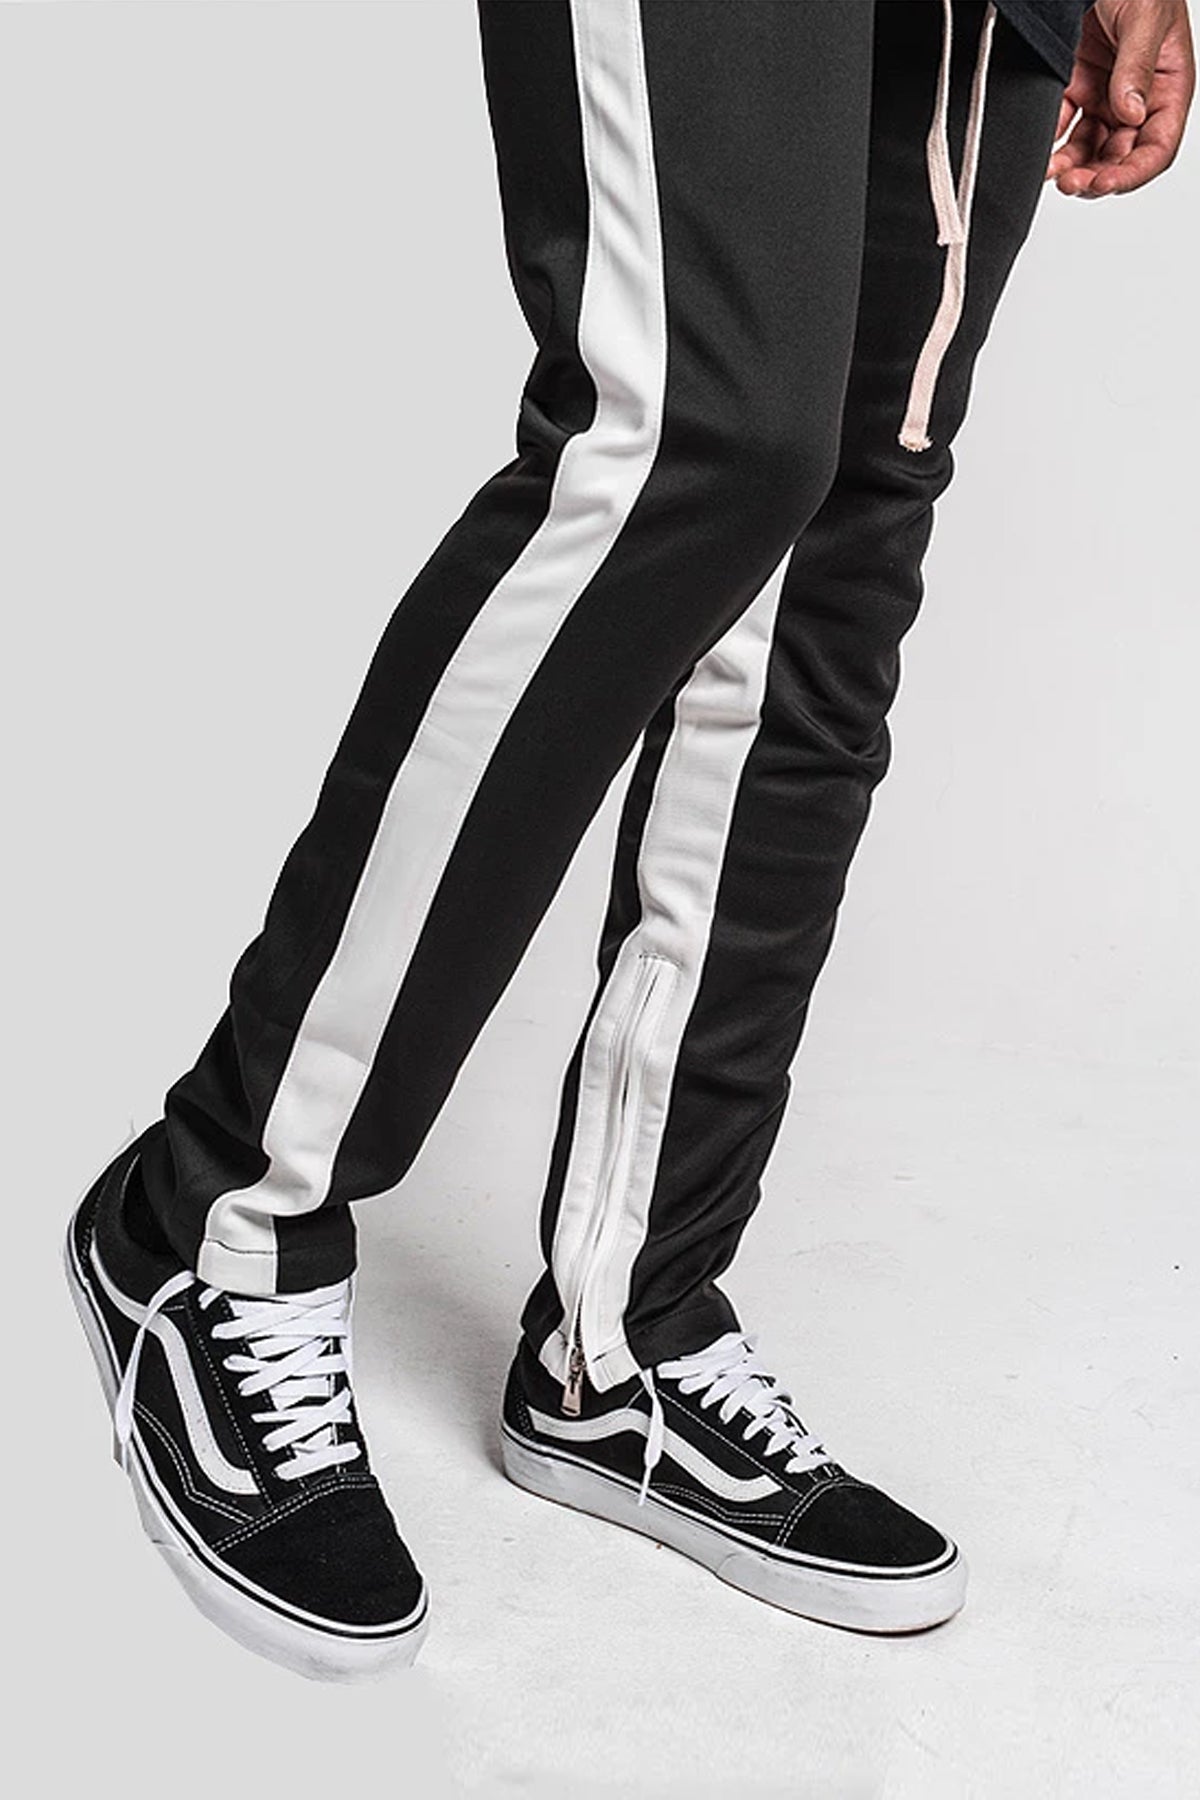 black pants with white stripe on side